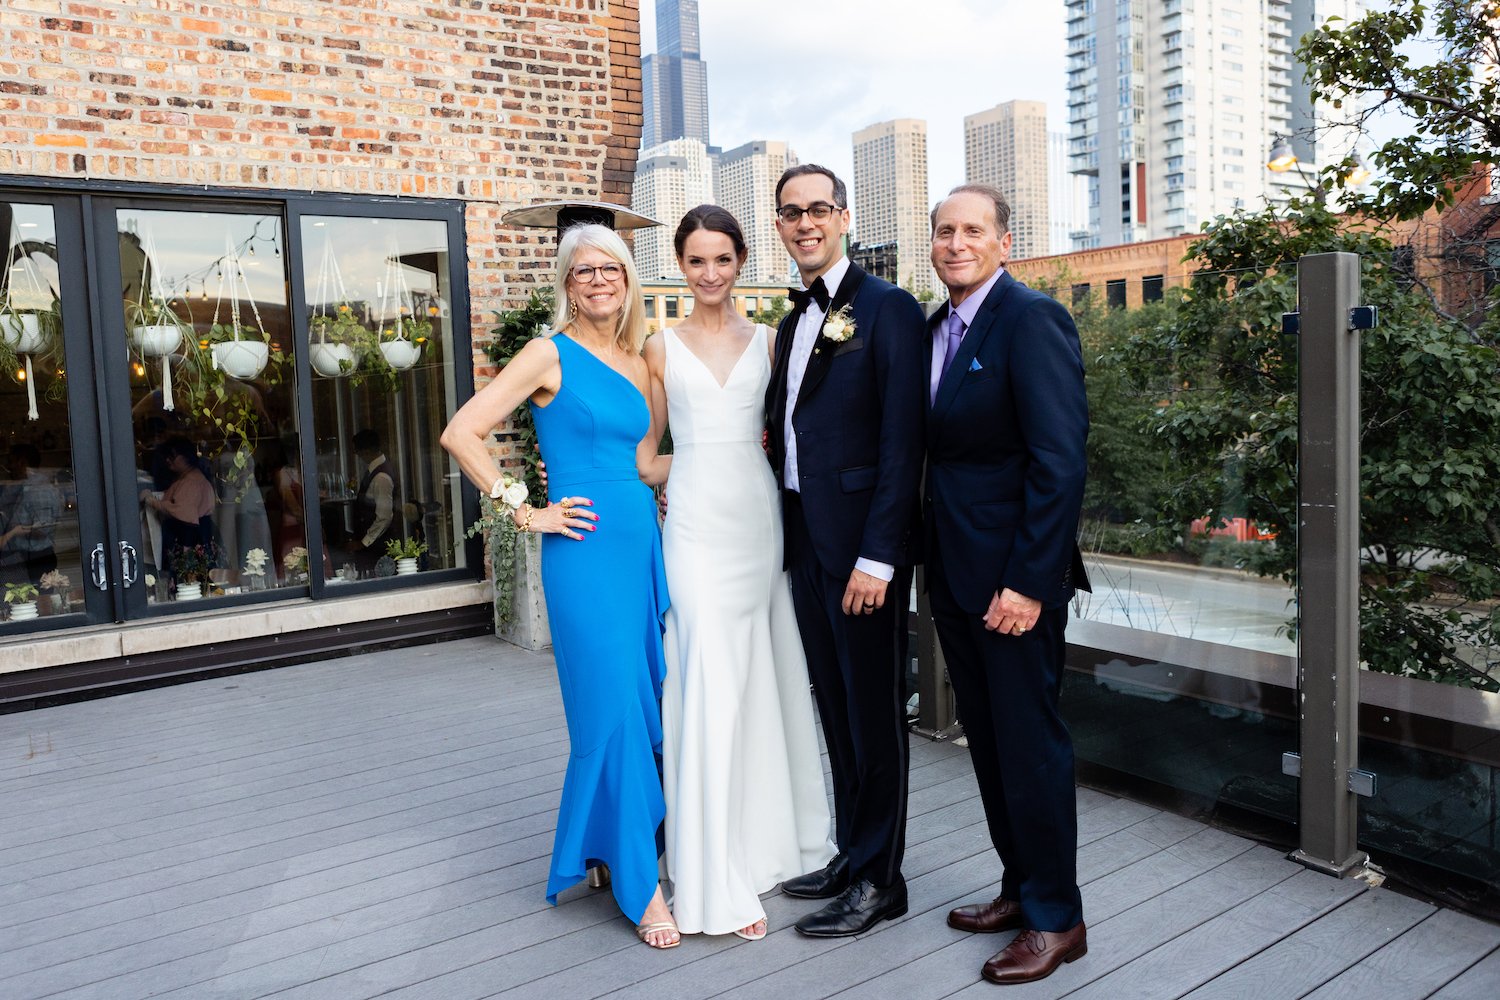 Bride_and_groom_with_parents_Chicago_rooftop.jpg